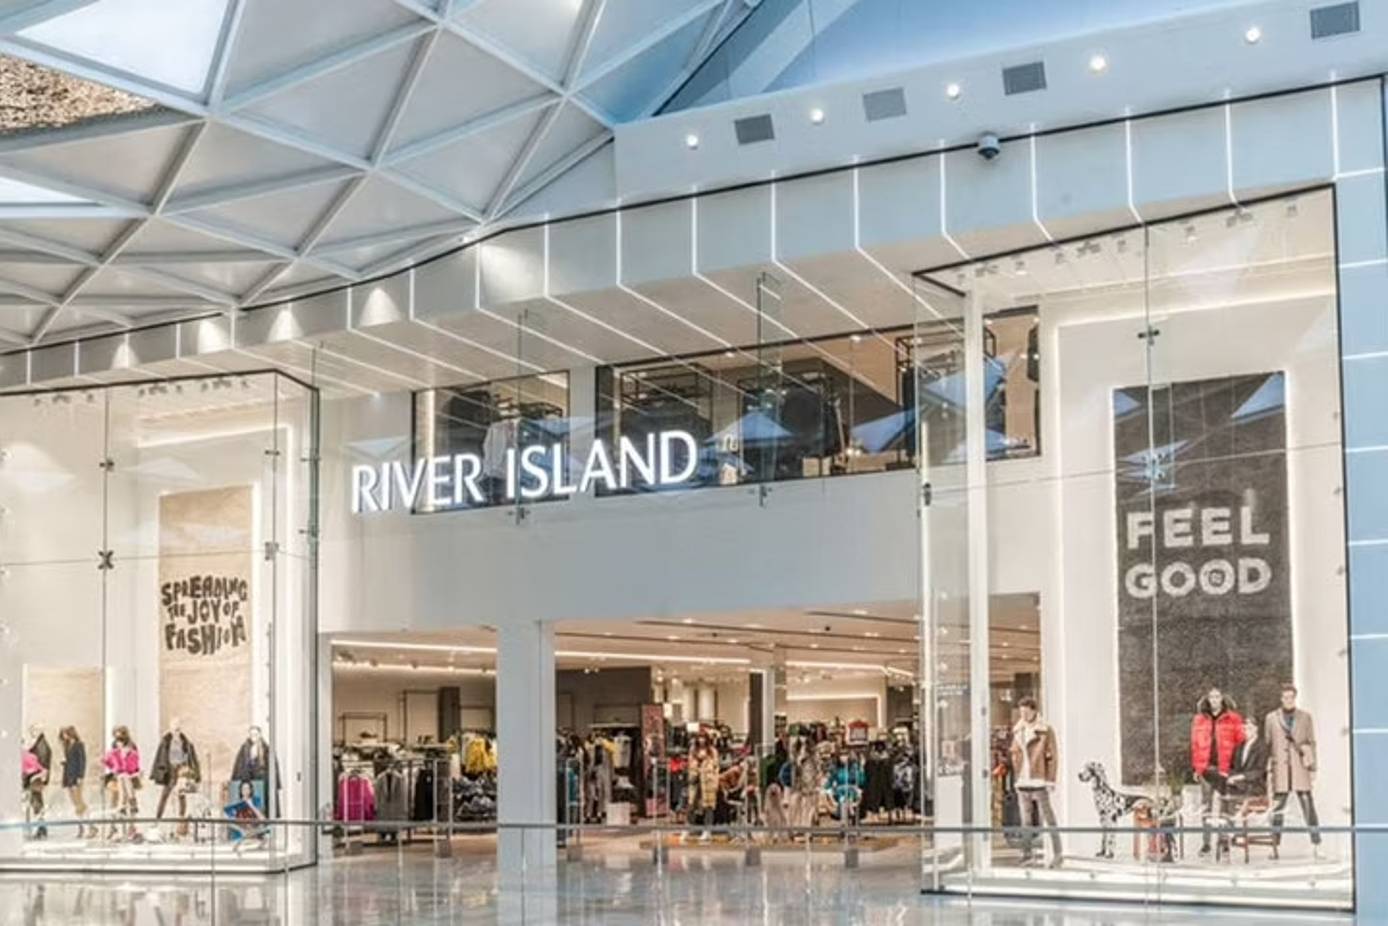 River Island's former CEO to return as executive chair